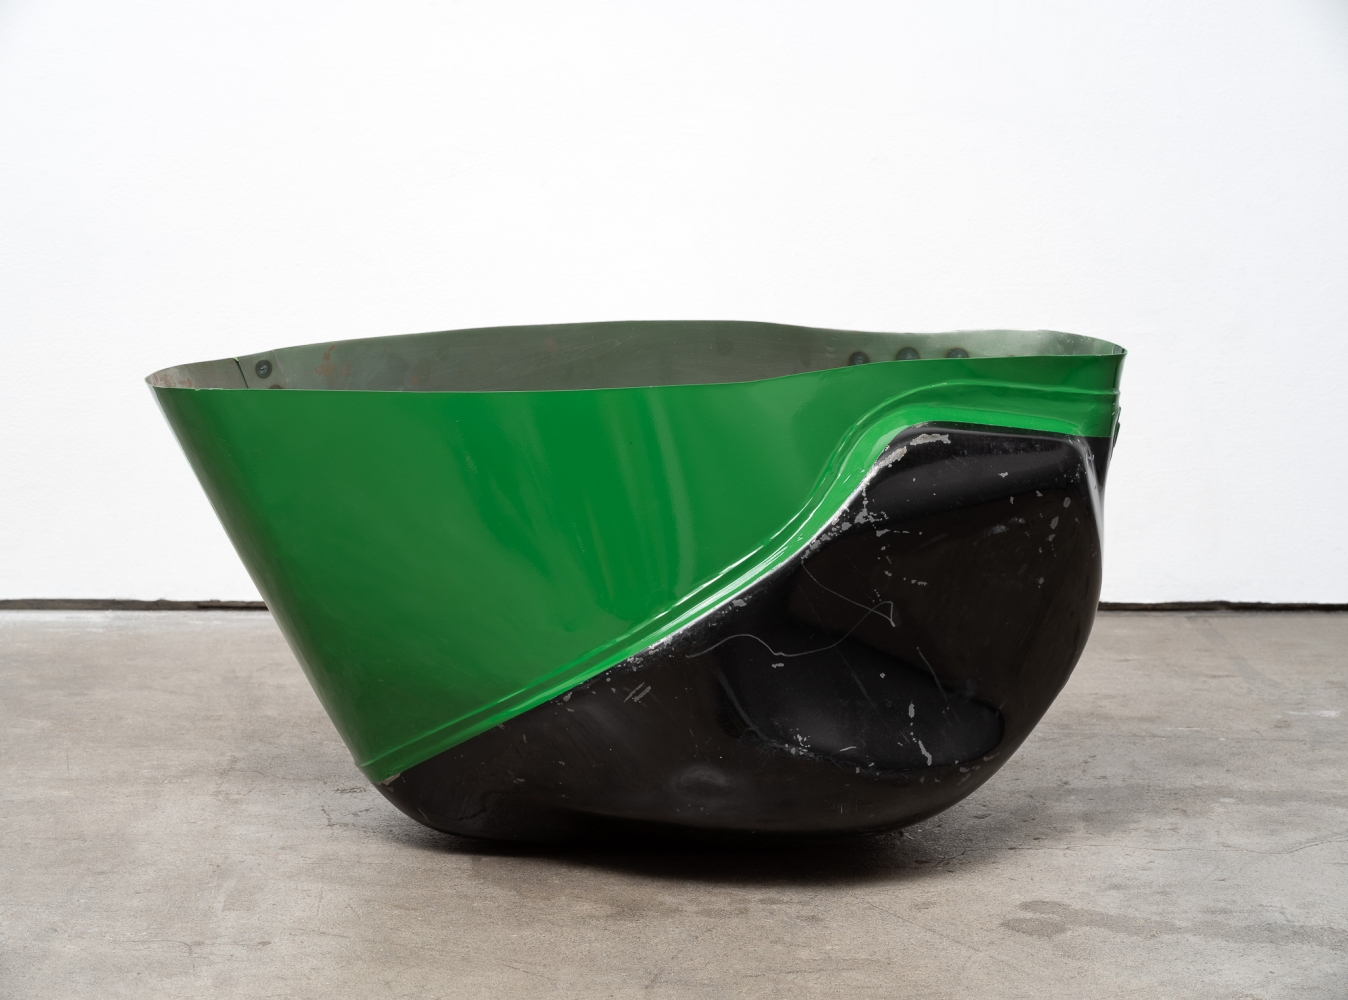 Elad Lassry

Untitled (Carrier, Glossy Black)

2019

Welded and painted steel

29 1/2 x 14 3/4 x 14 1/2 inches (74.9 x 37.5 x 36.8 cm)

Unique

EL 516

$35,000

&amp;nbsp;

INQUIRE